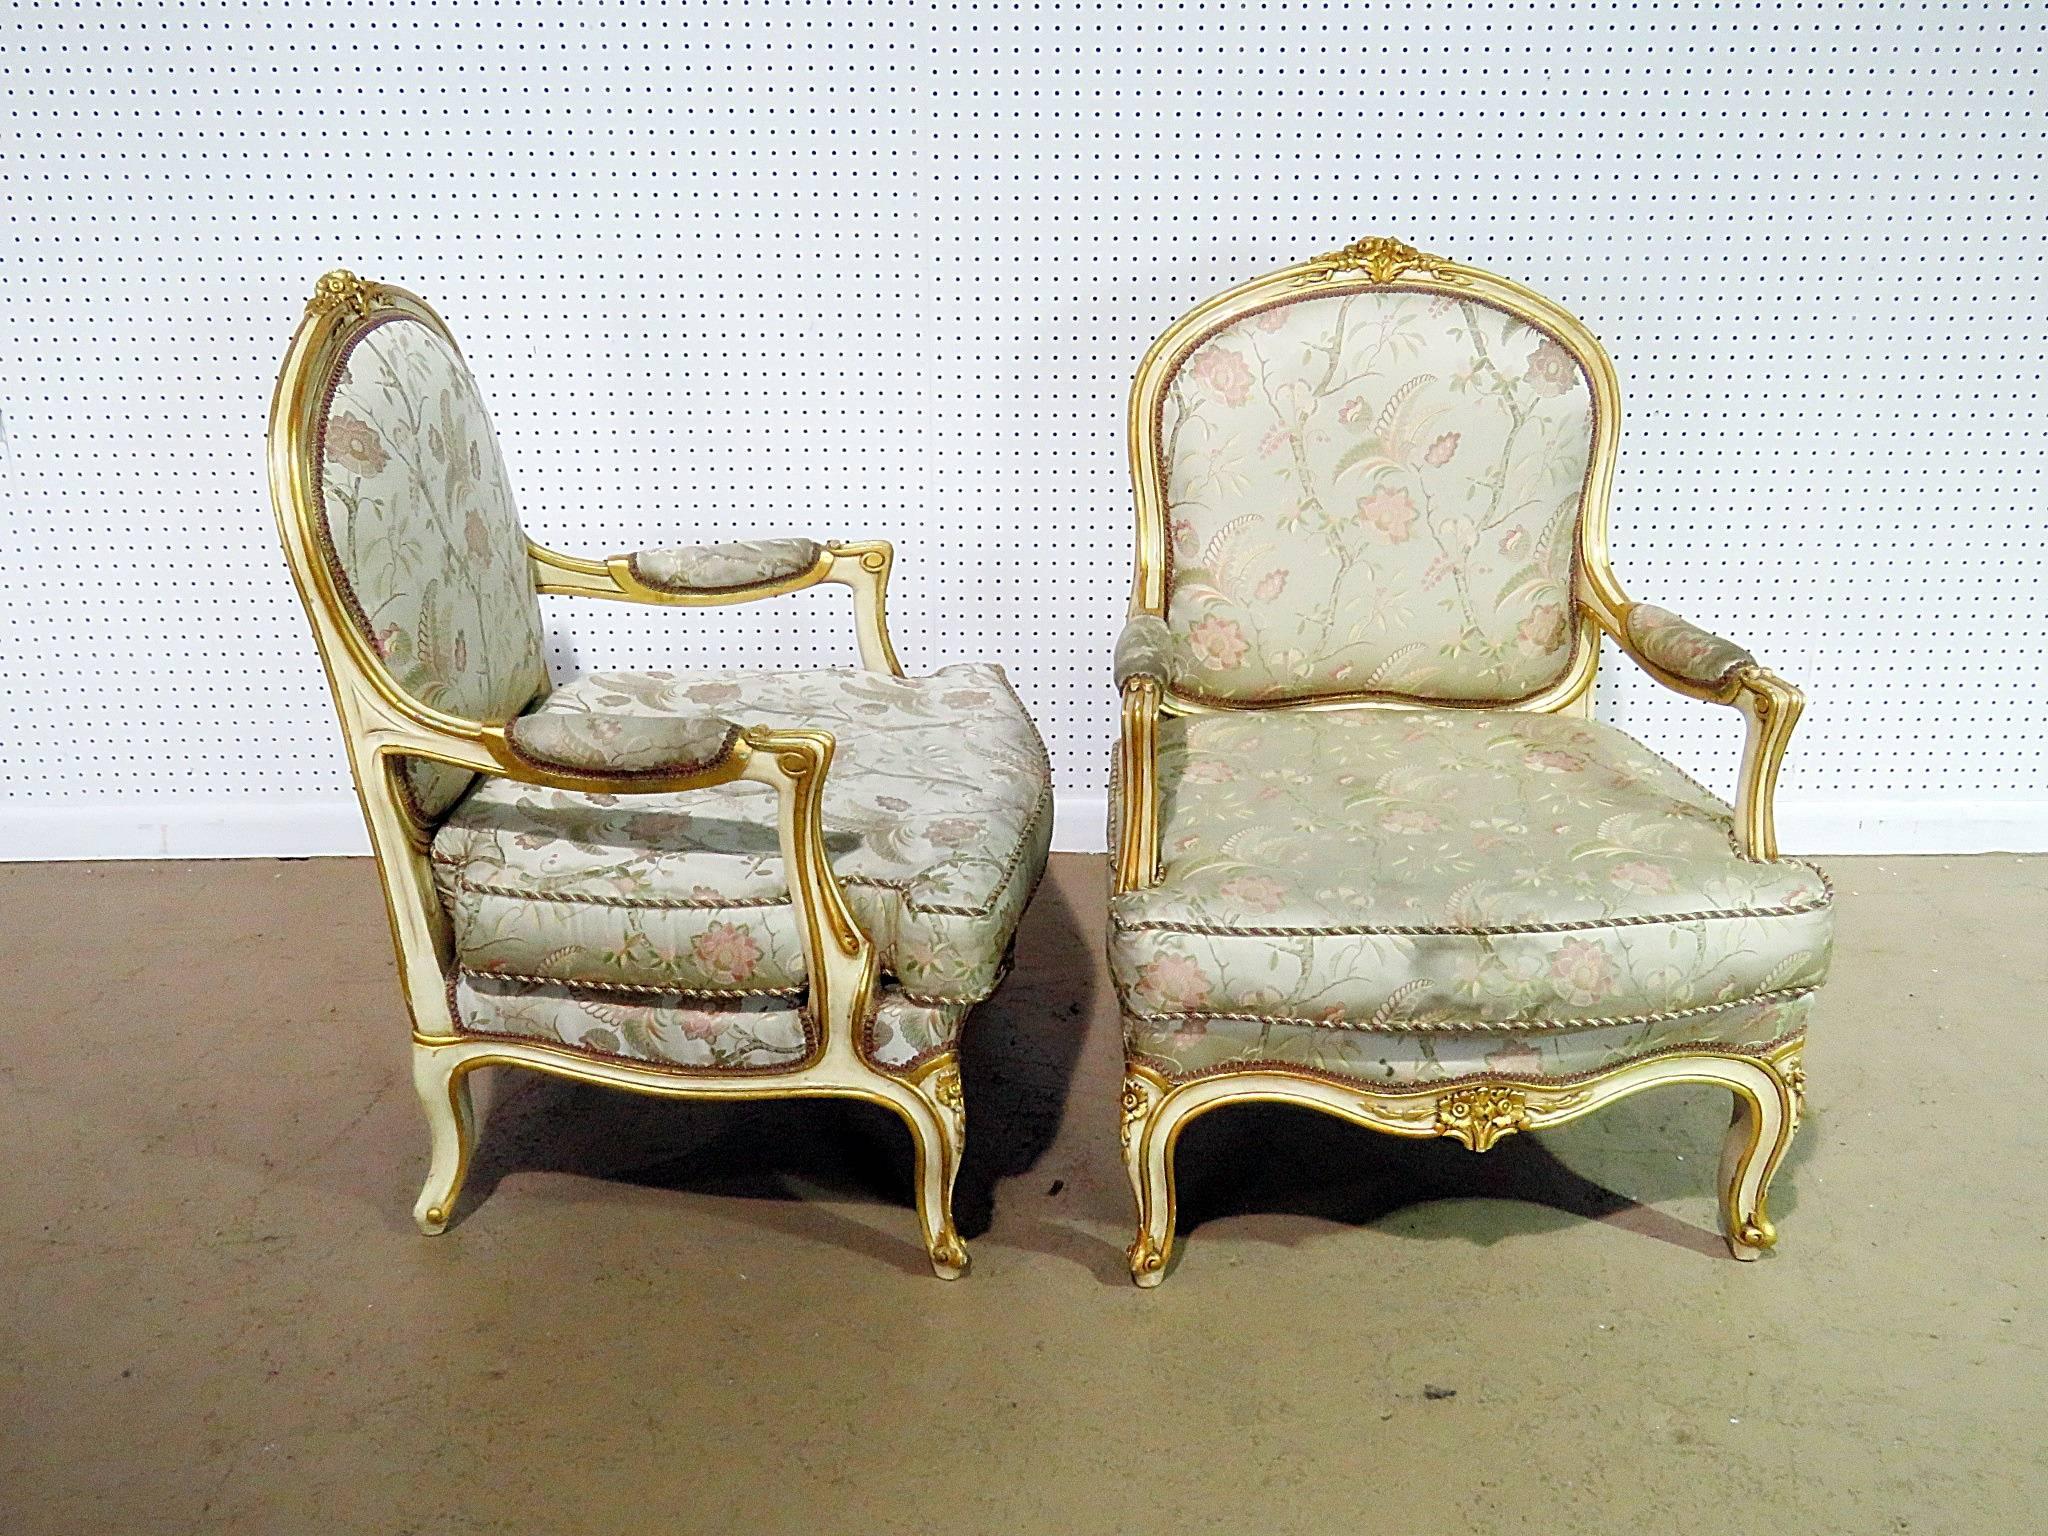 Pair of Louis XV style distressed painted fauteuils with gilt trim.